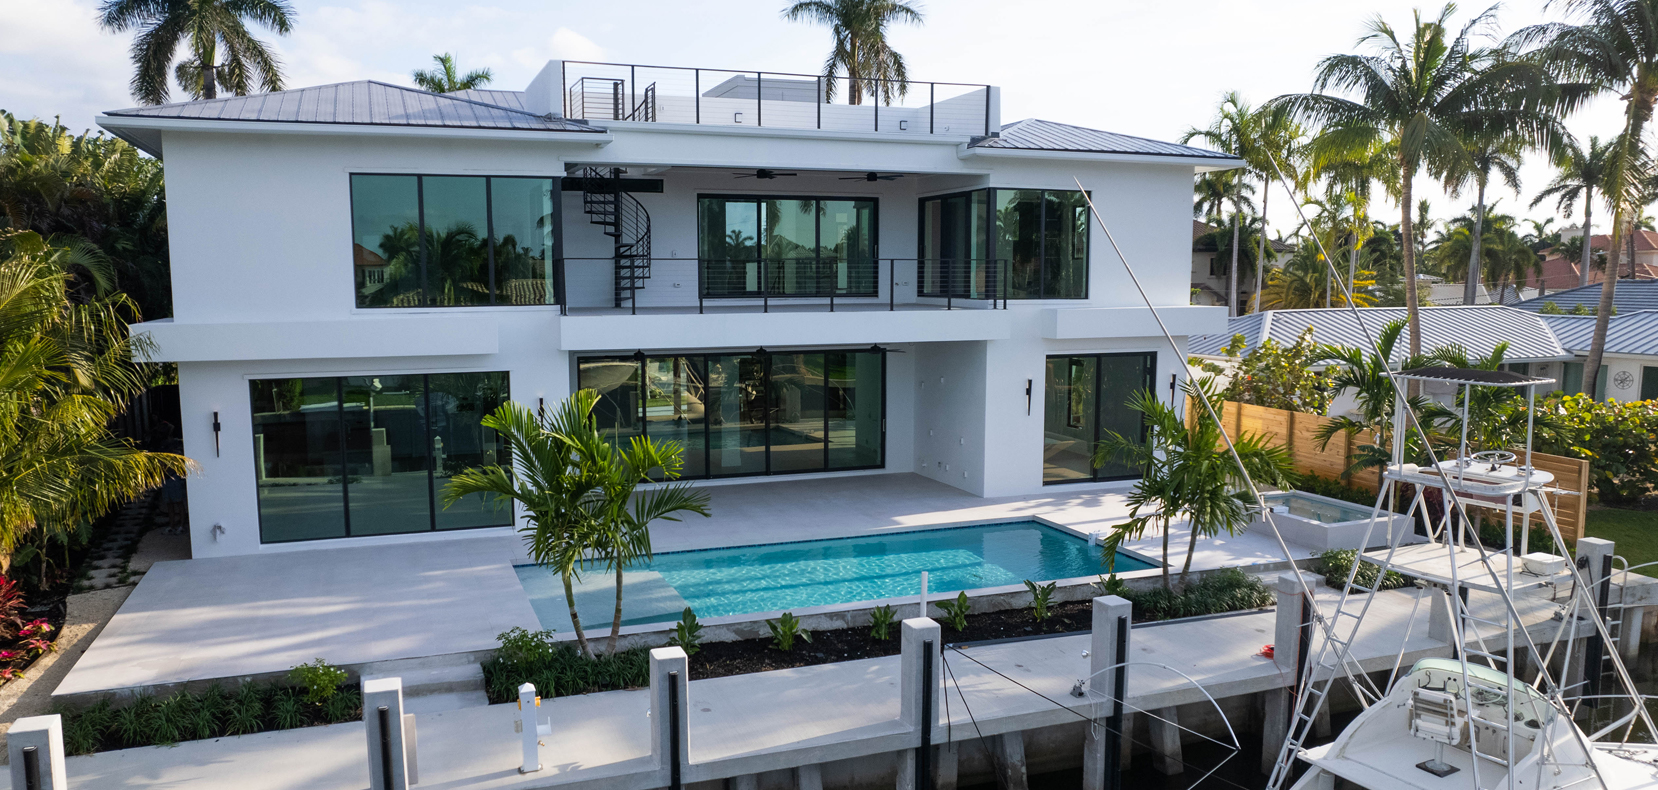 house build on intracoastal waterway